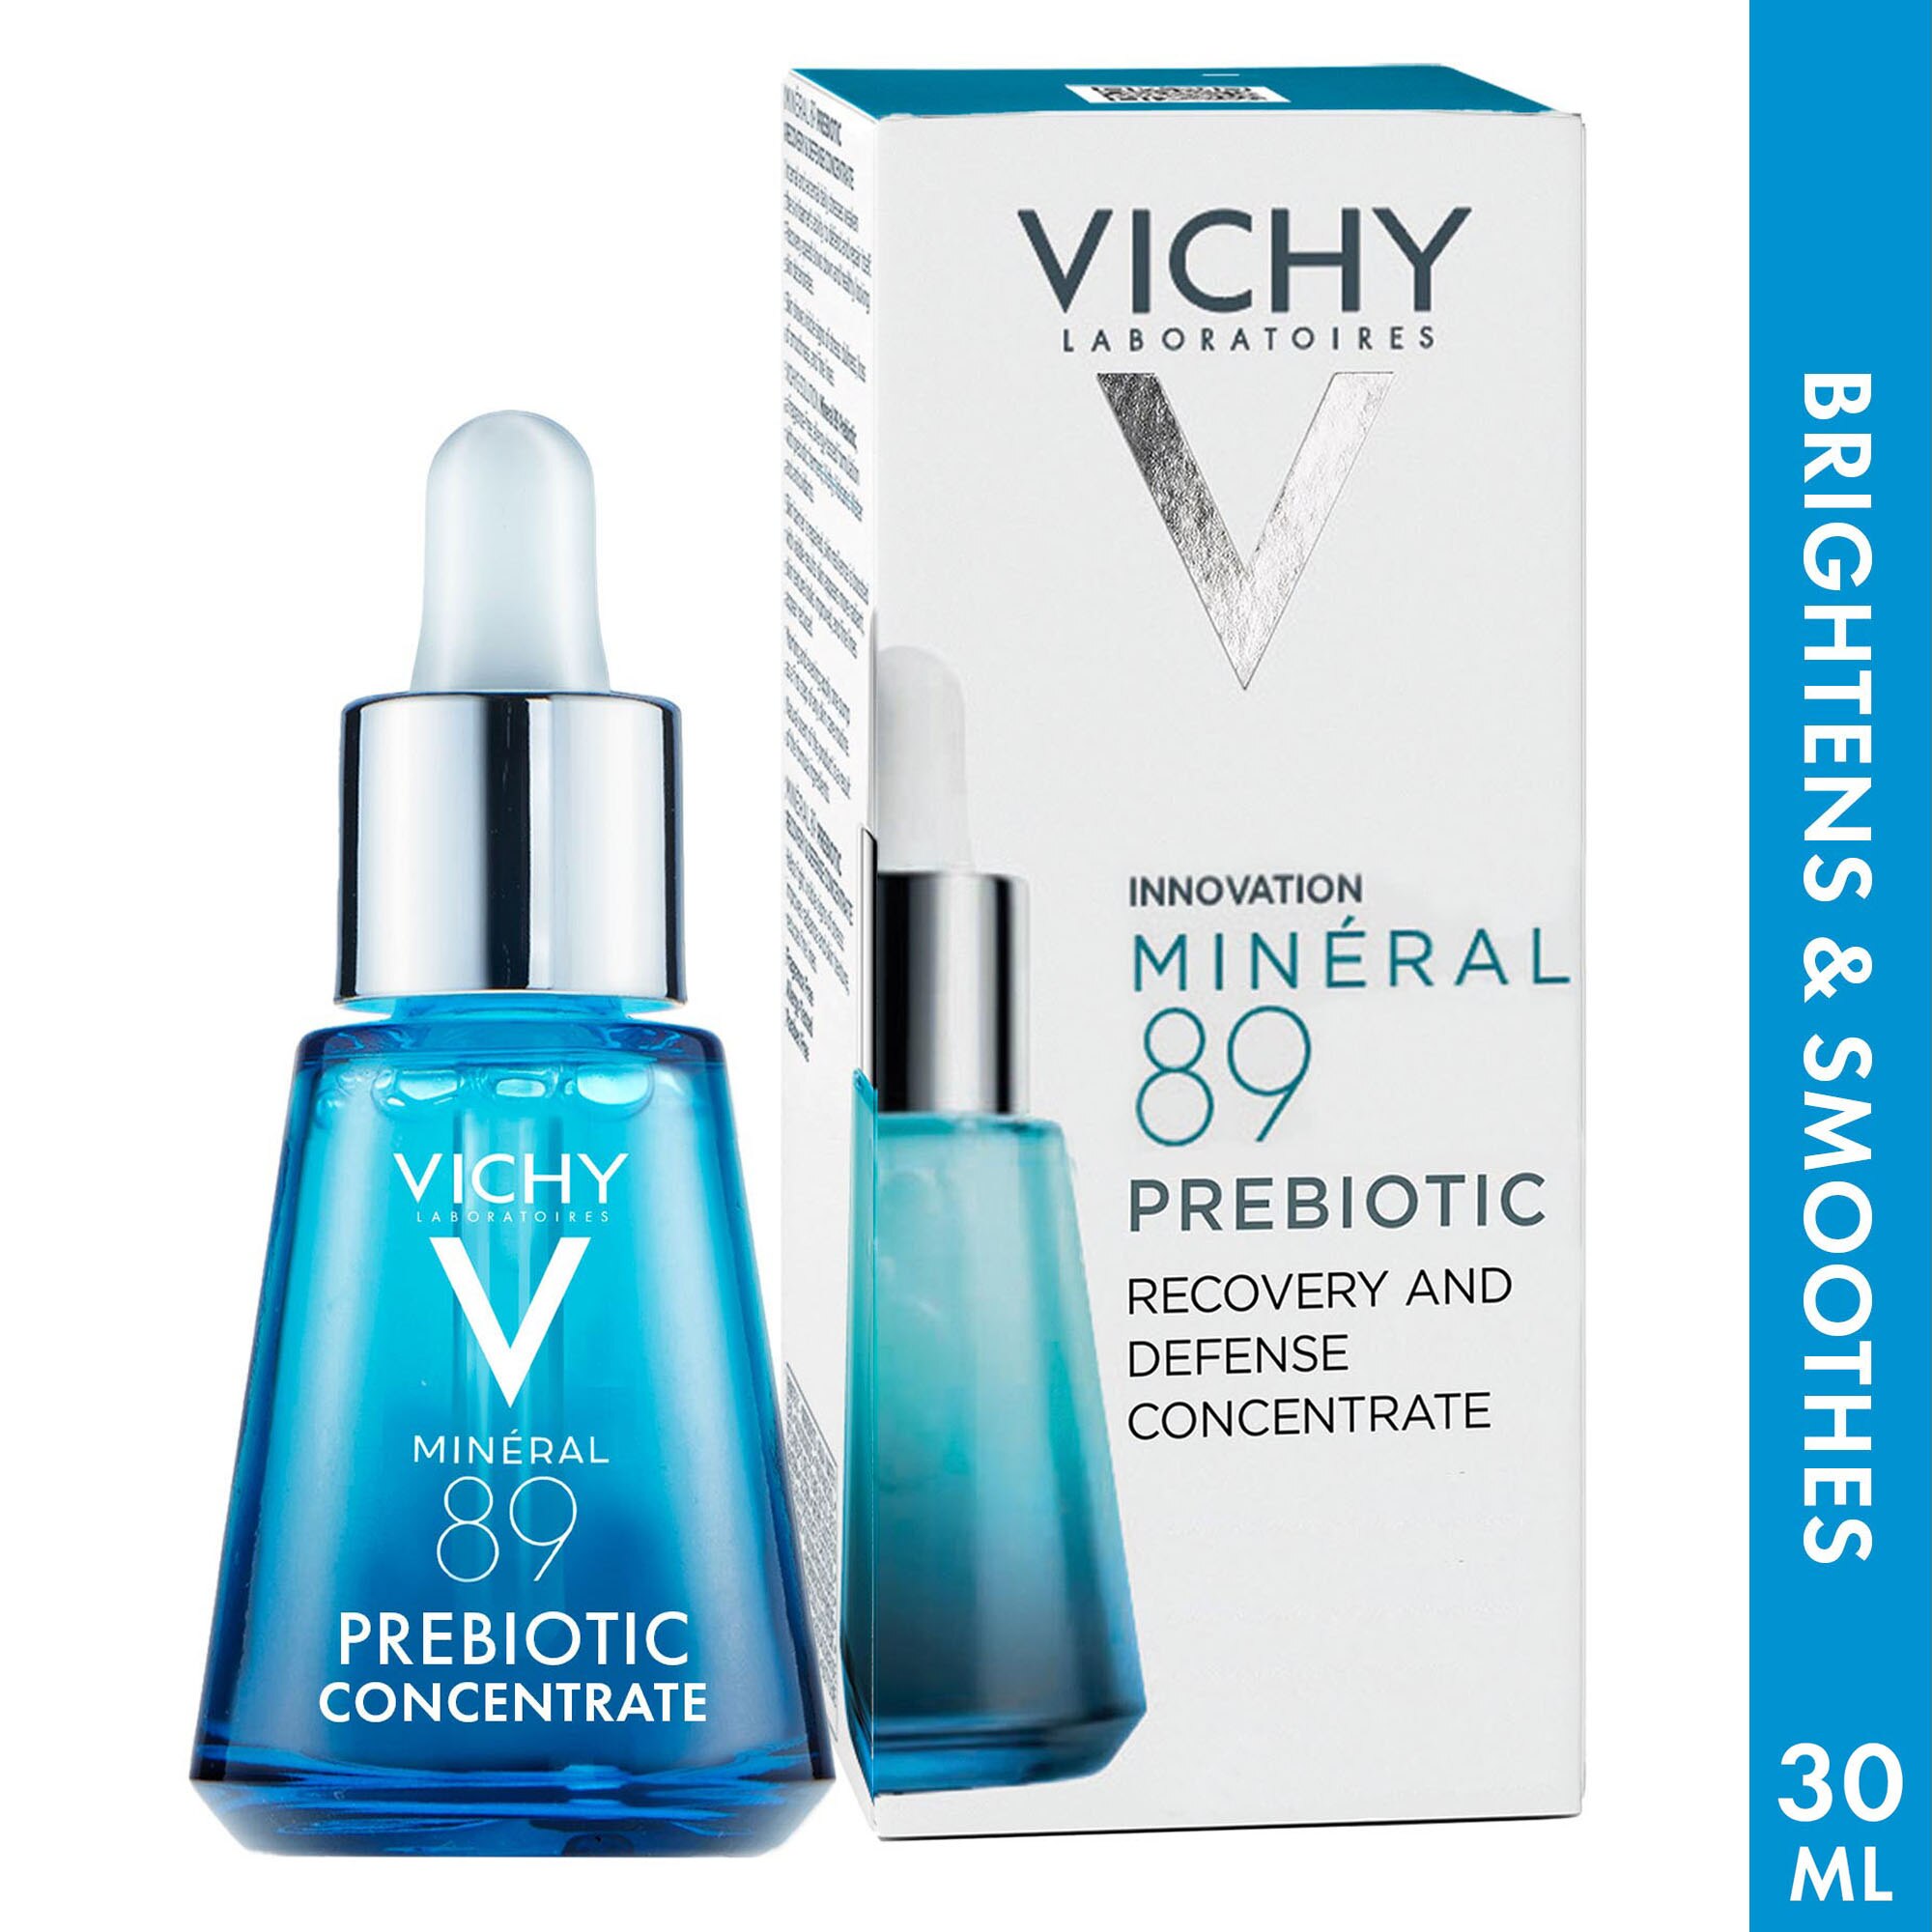 Vichy Mineral 89 Face Serum Prebiotic Recovery and Defense Concentrate, 1.01 OZ